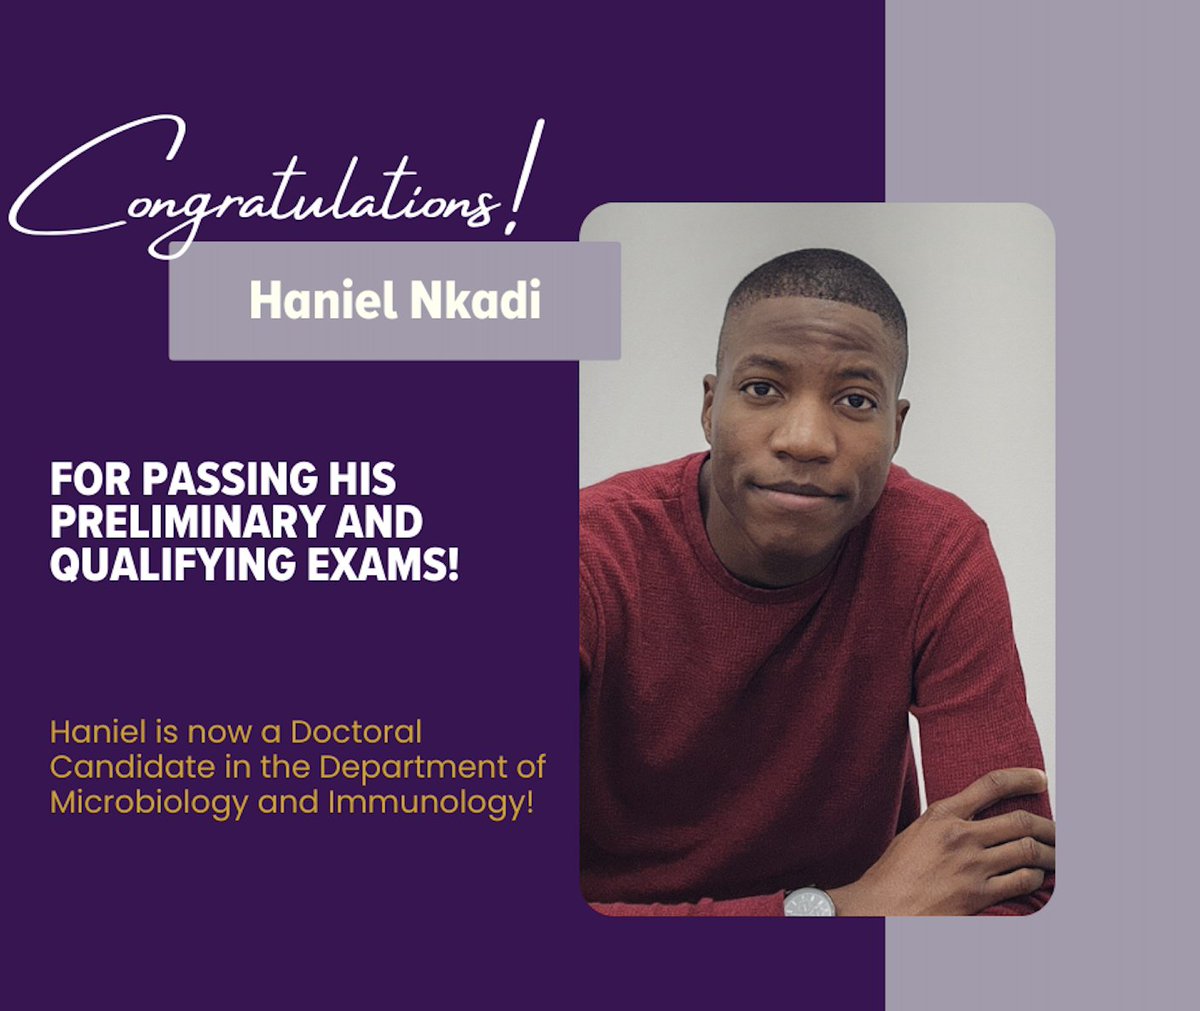 Congrats to @Sir_Haniel for officially becoming a doctoral candidate in @LSUHS_Micro at @LSUHS_PhD!